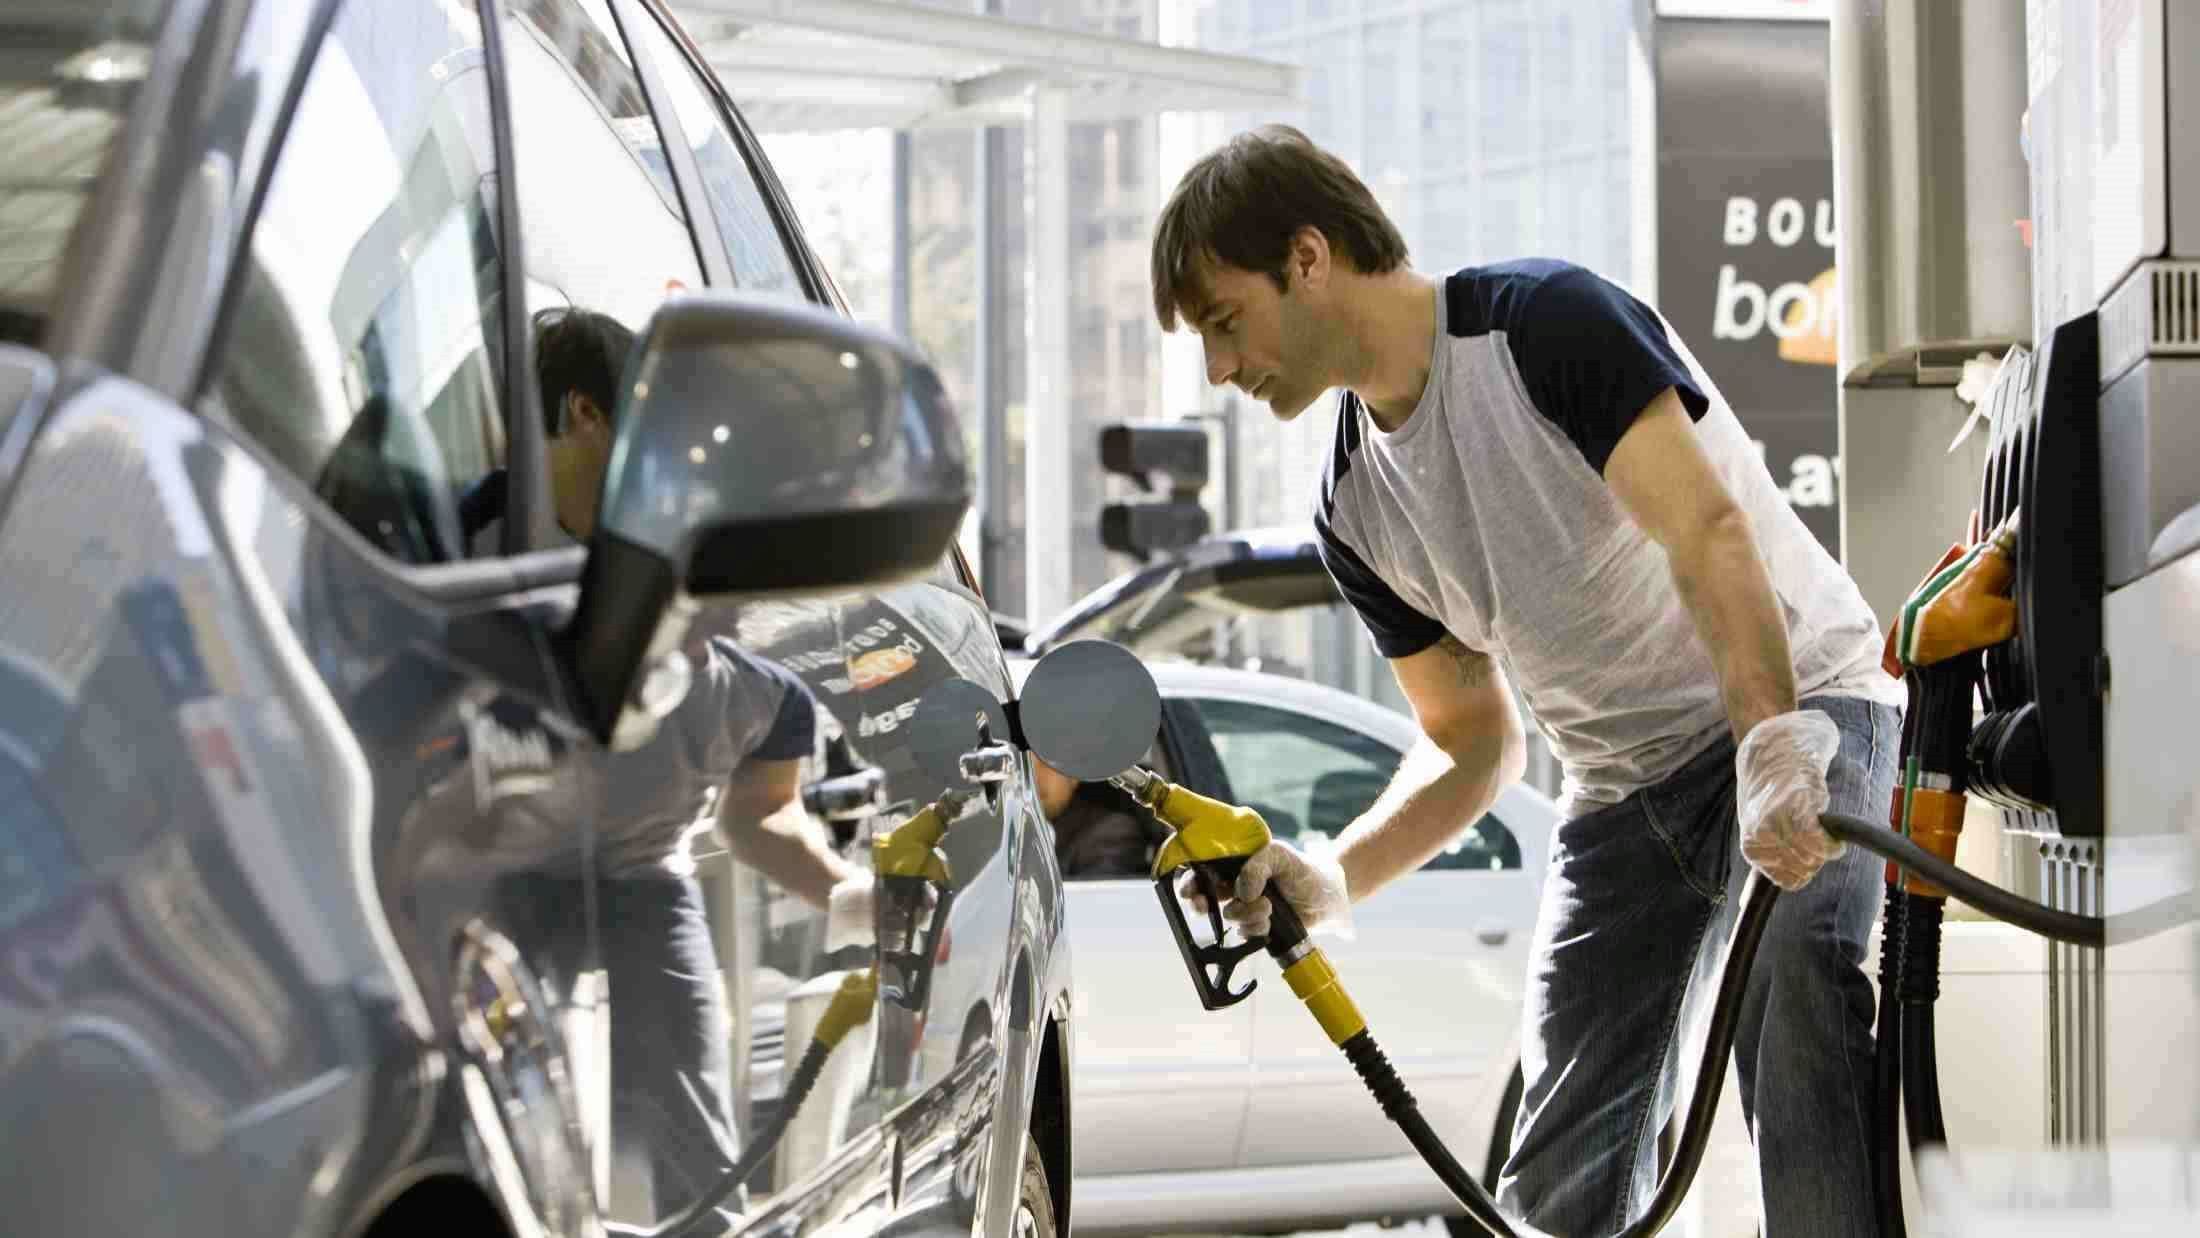 A man fuelling his car with petrol